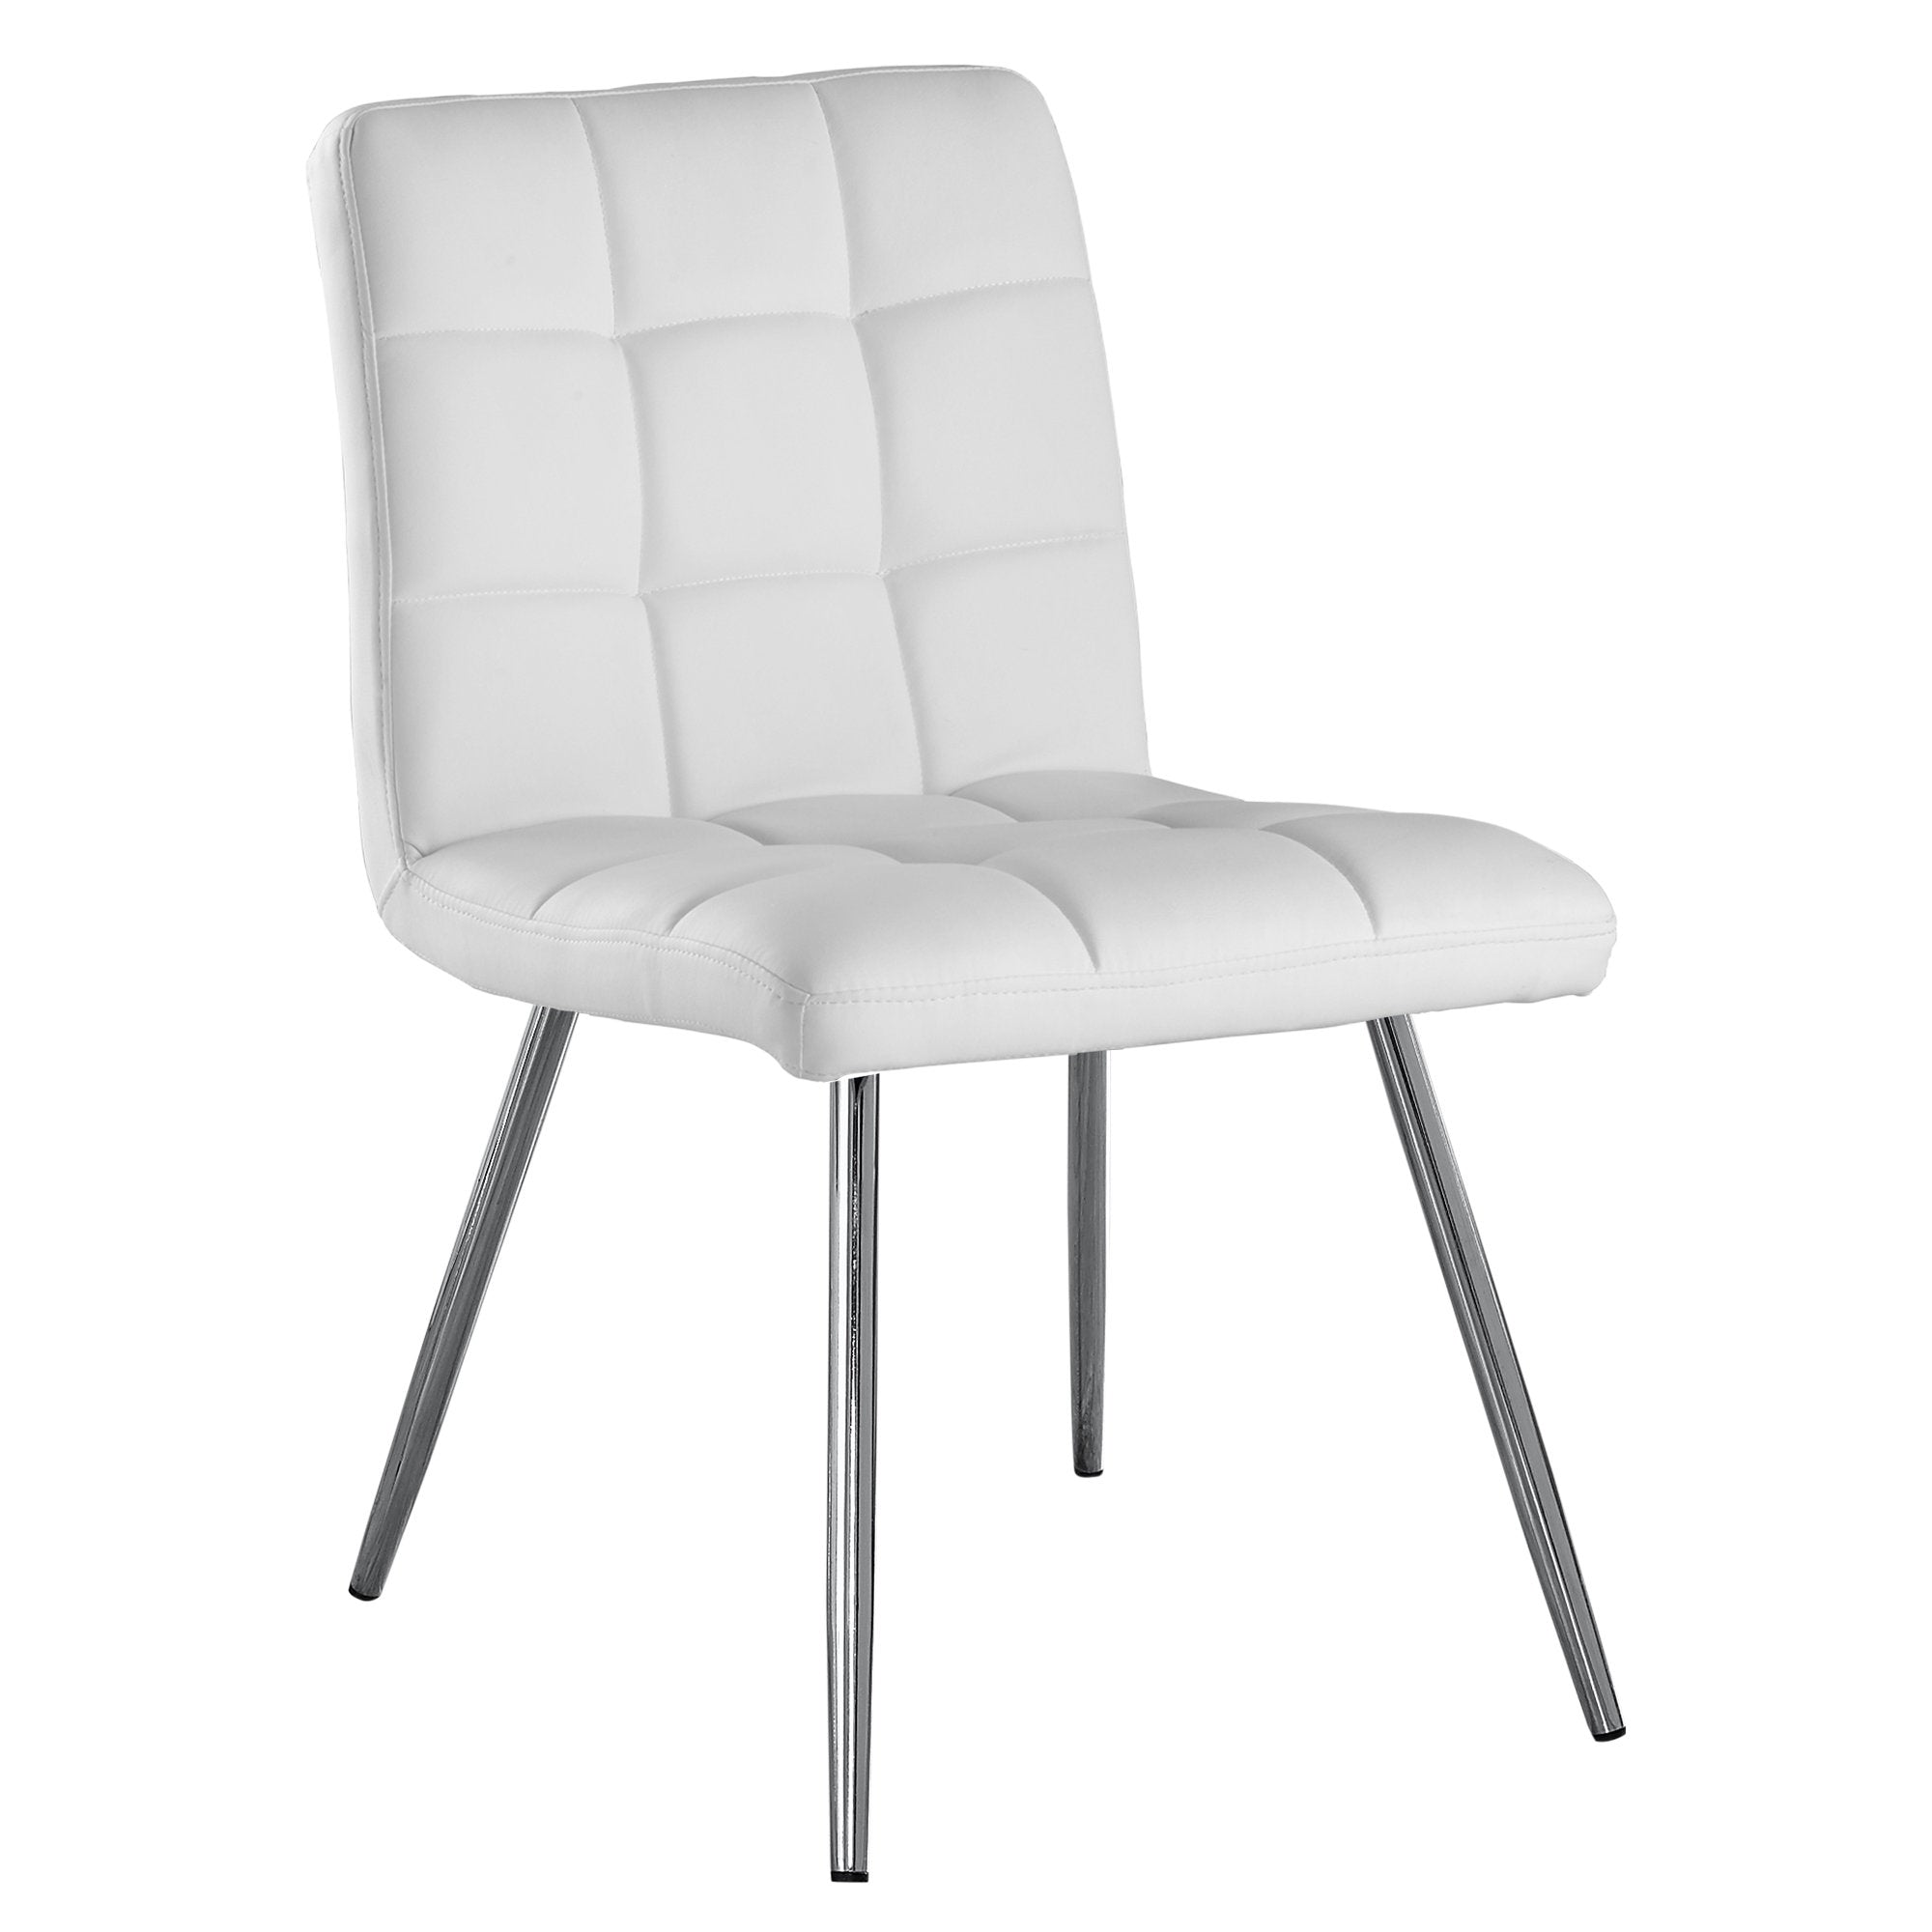 47" x 37" x 63" White, Foam, Metal, Polyurethane, Leather-Look - Dining Chairs 2pcs